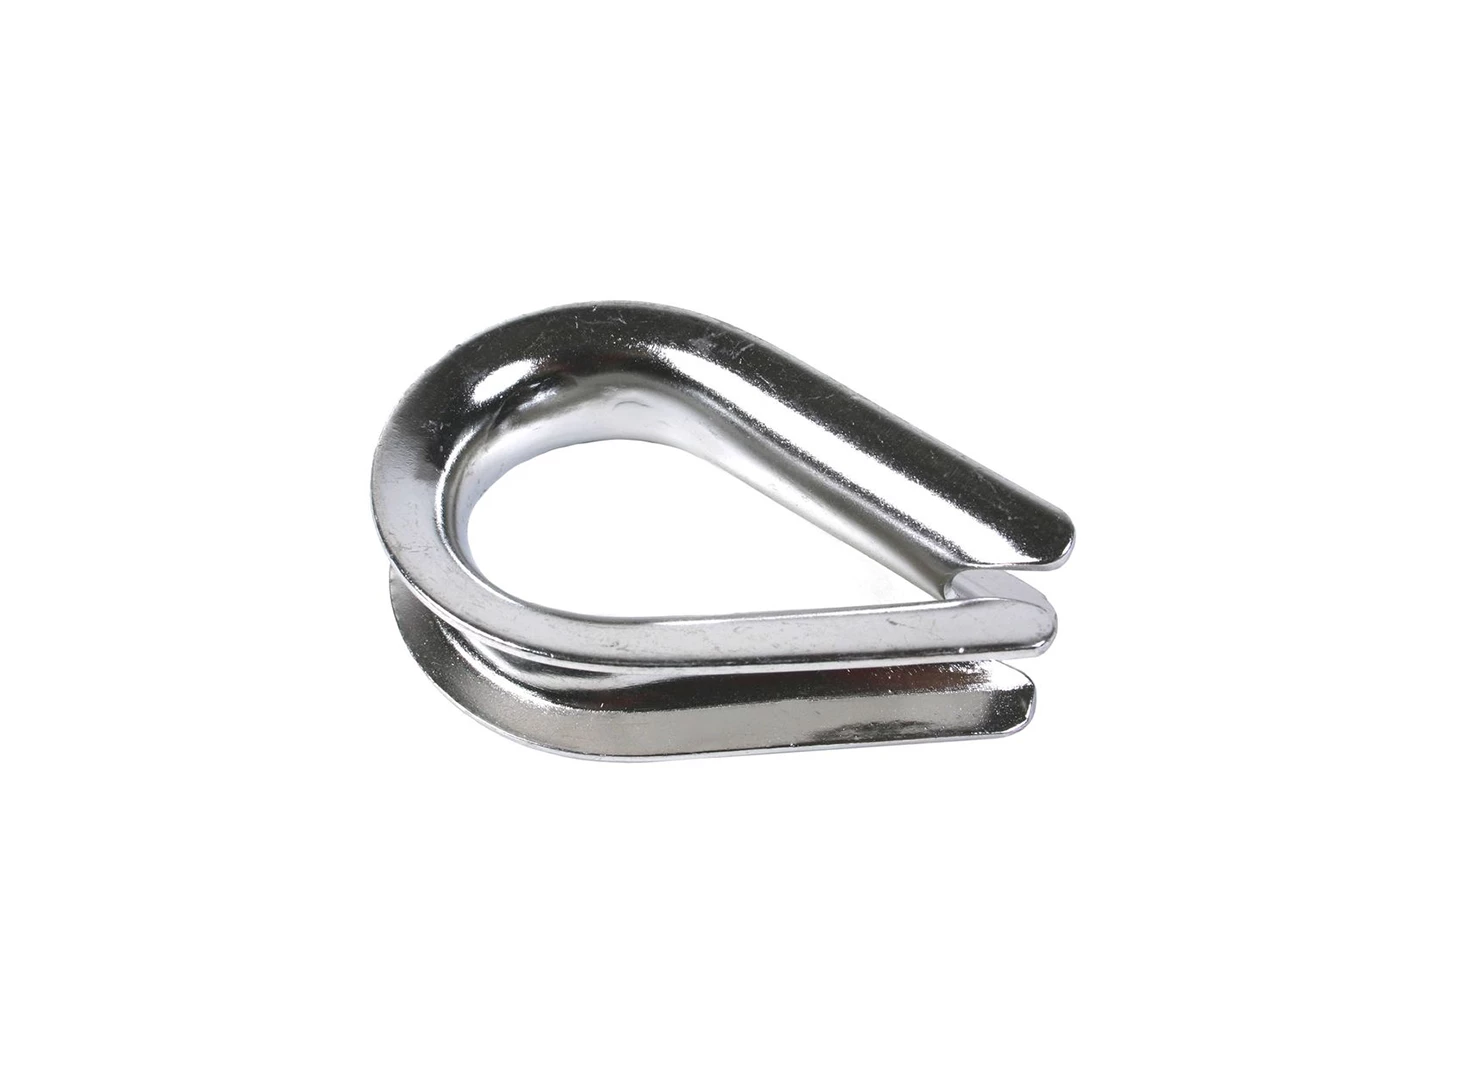 Product: Thimble 21-22mm